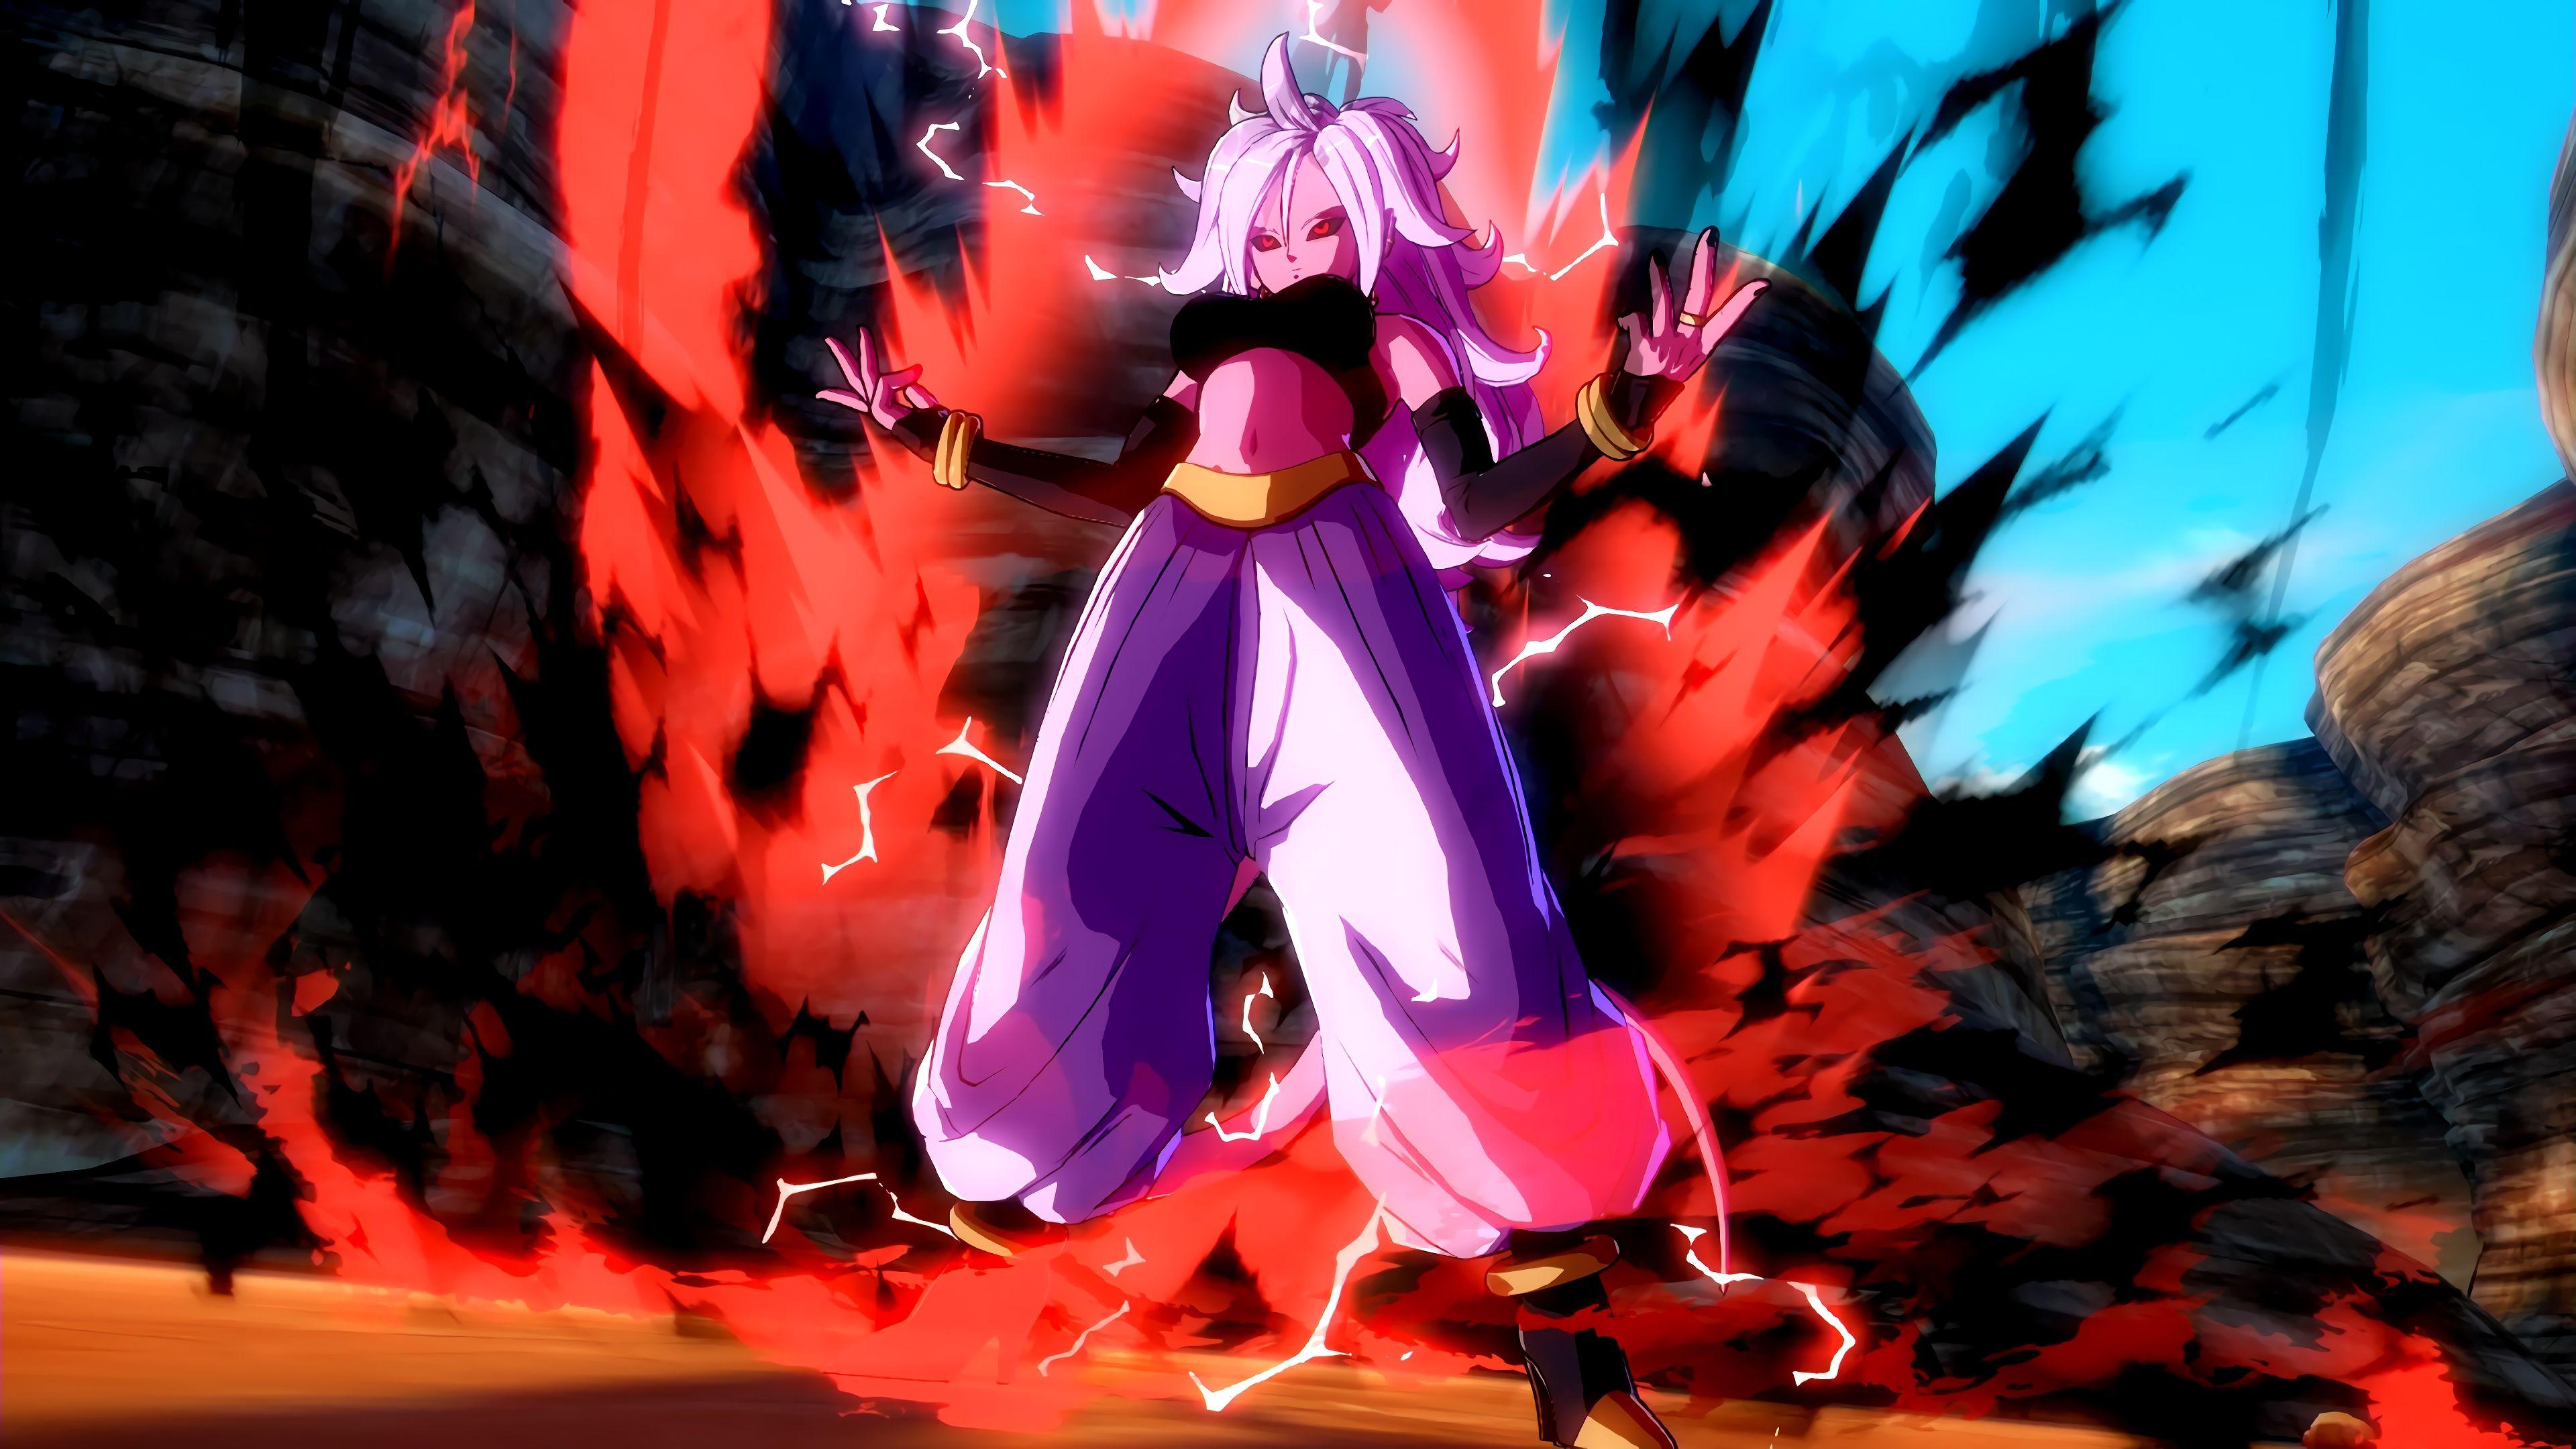 Android 21 Wallpaper Free Android 21 Background